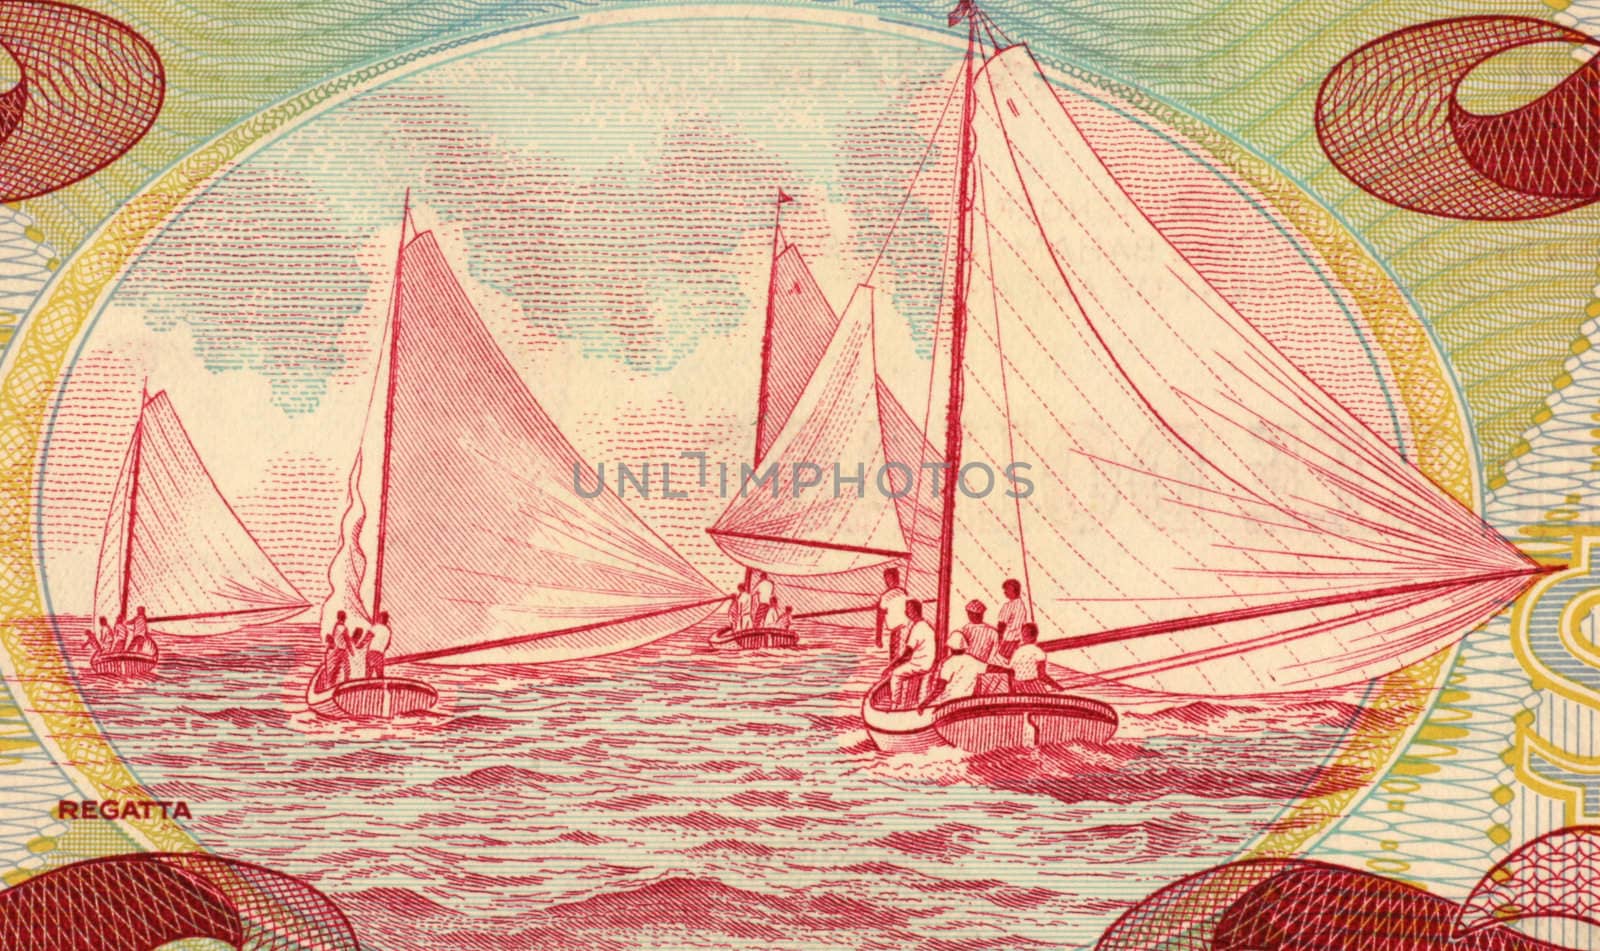 Boat Race on 3 Dollars 1984 Banknote from Bahamas.